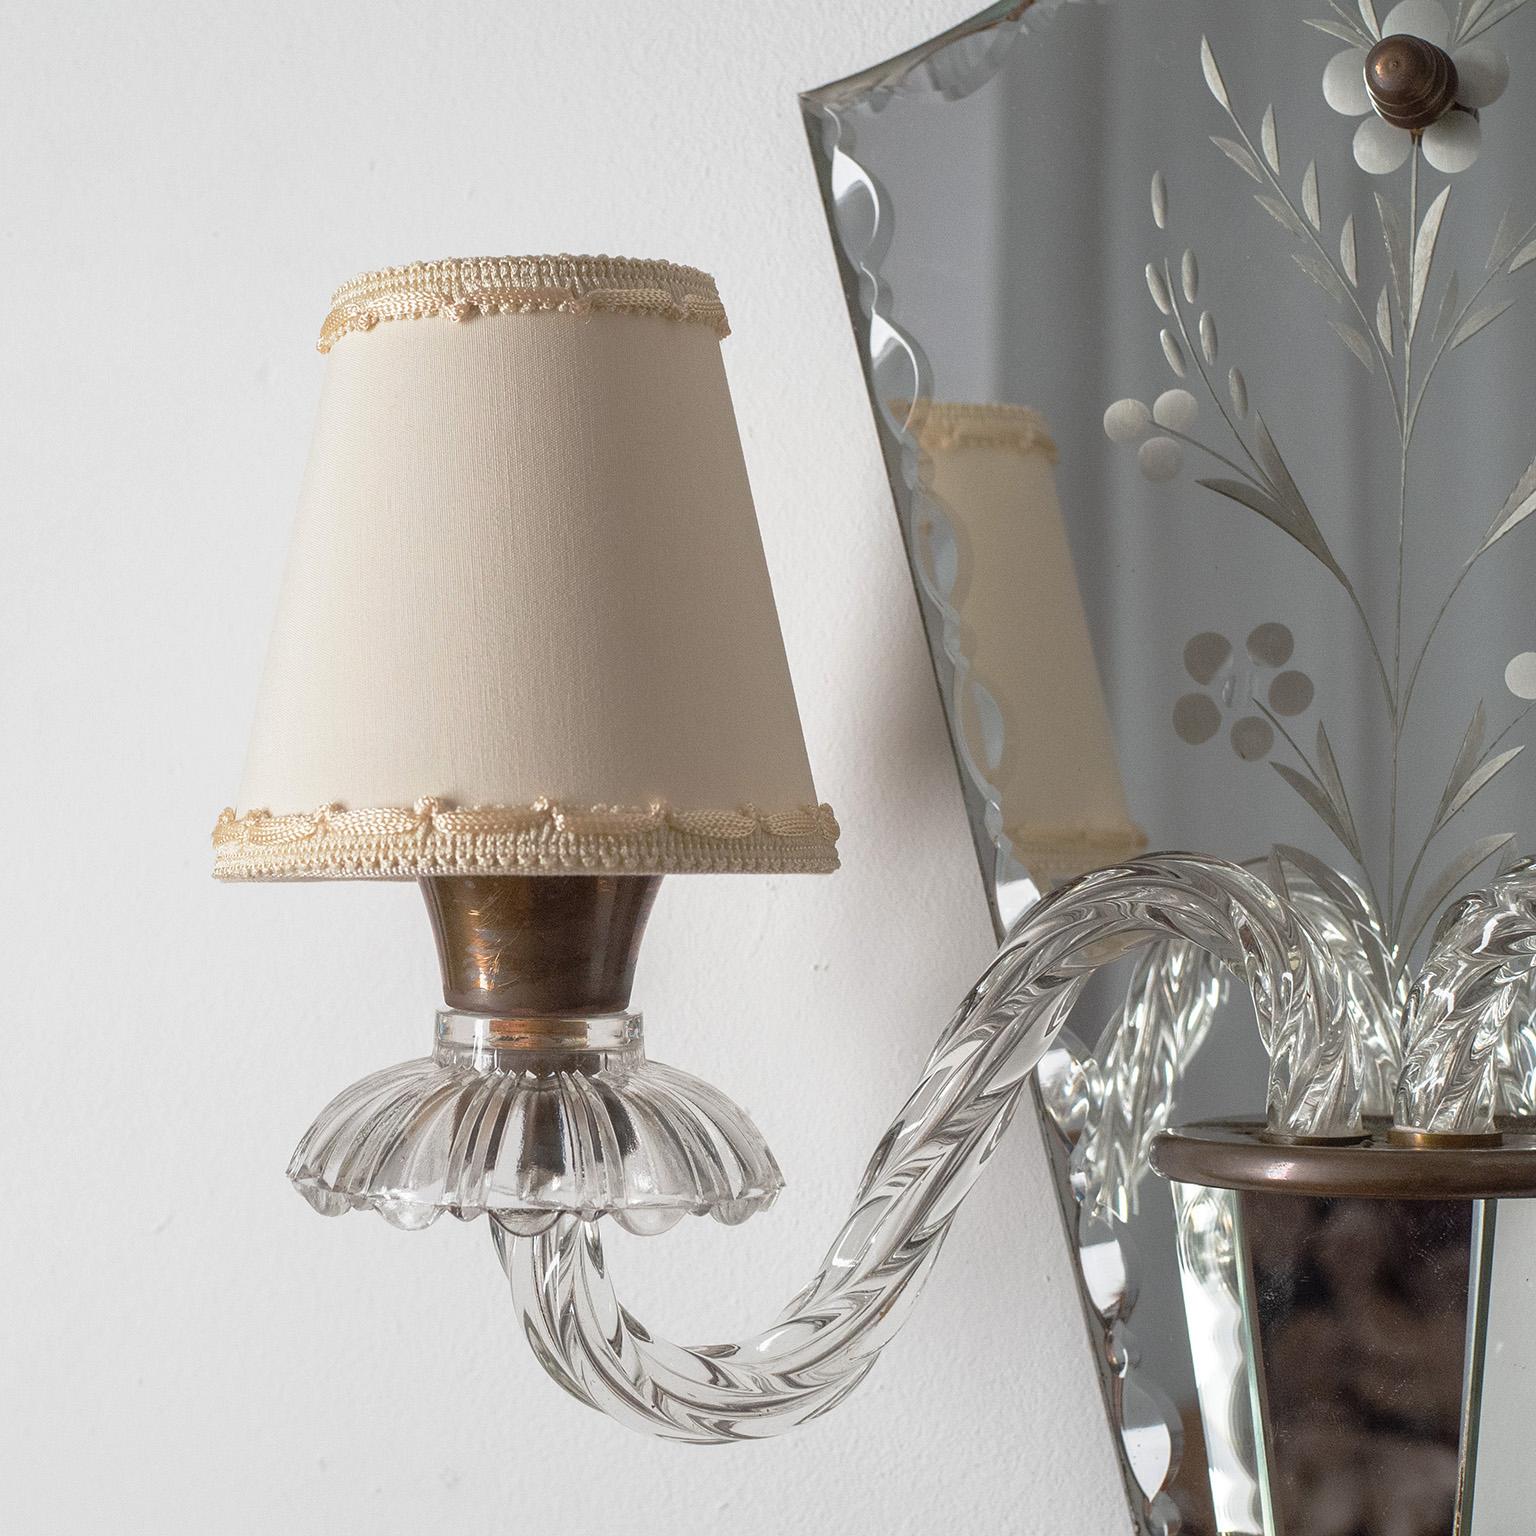 Mid-20th Century French Wall Lights, circa 1940, Cut and Etched Mirror